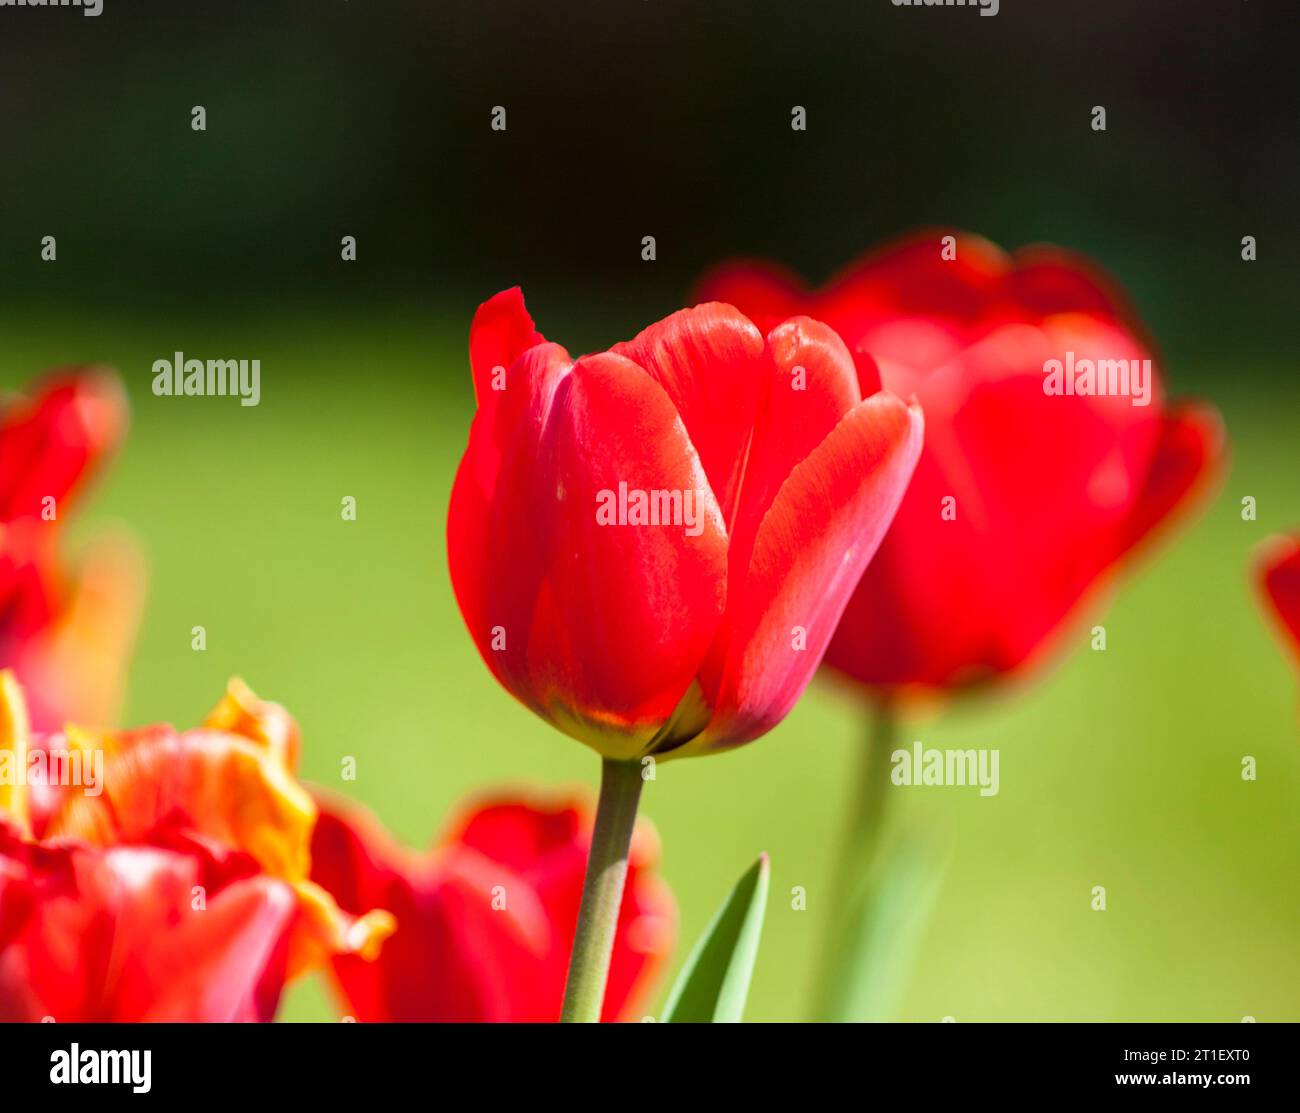 A main tulip with others in the background Stock Photo